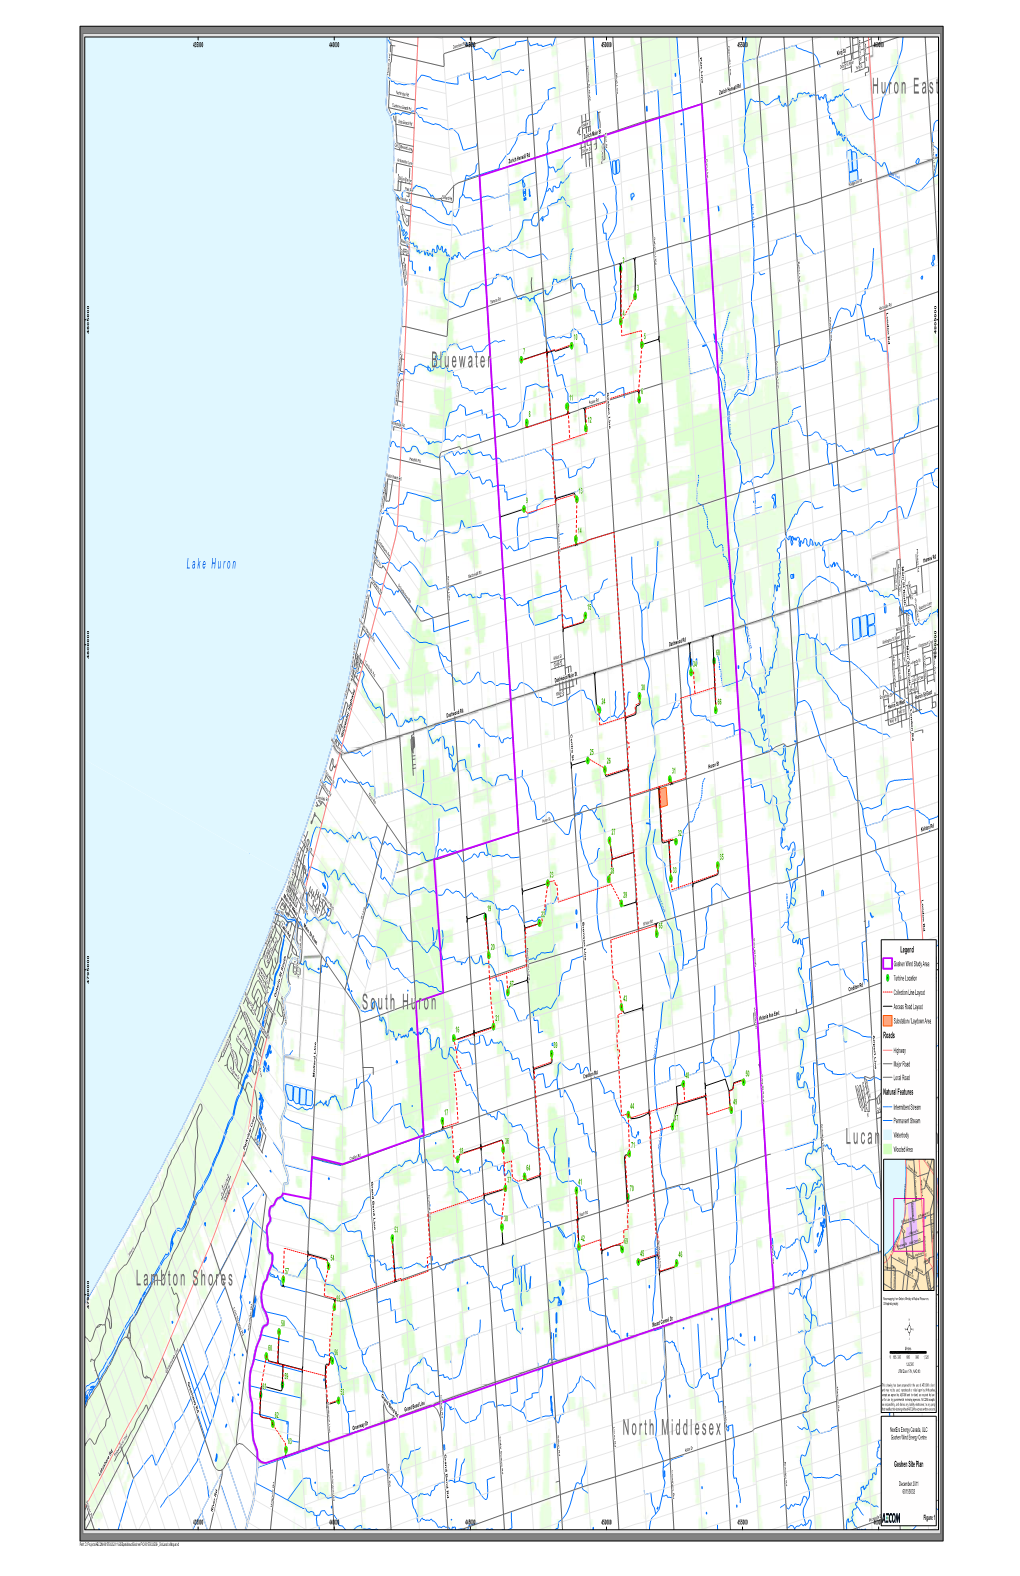 South Huron Bluewater North Middlesex Lambton Shores Huron